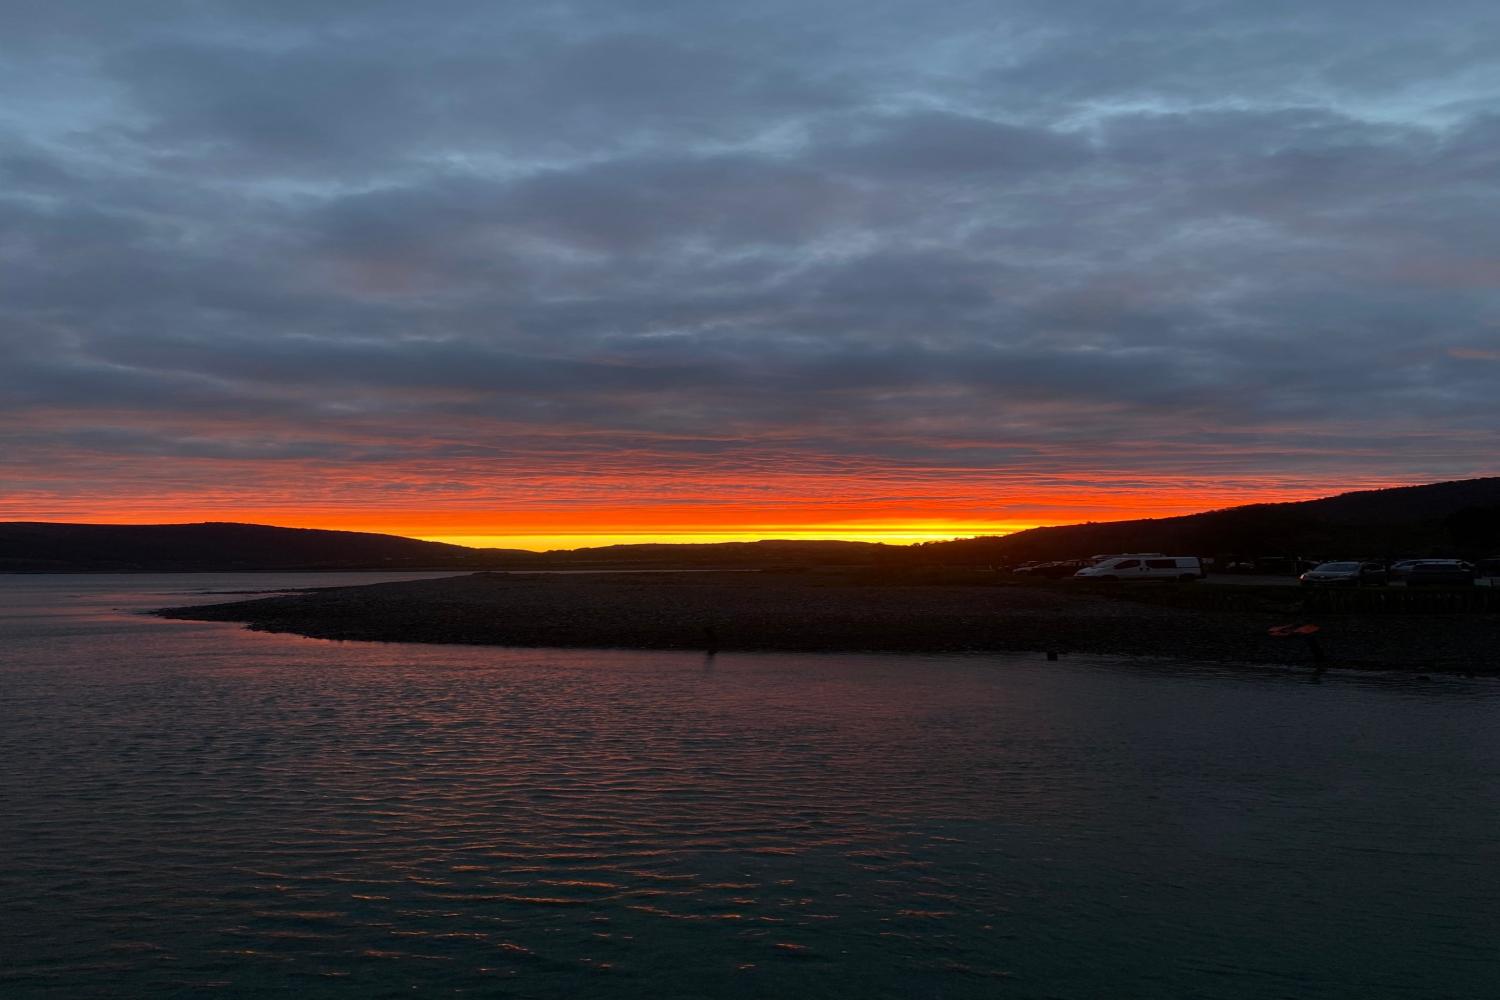 Early risers catch sunrise at Harbour House Apartment Porlock Weir.